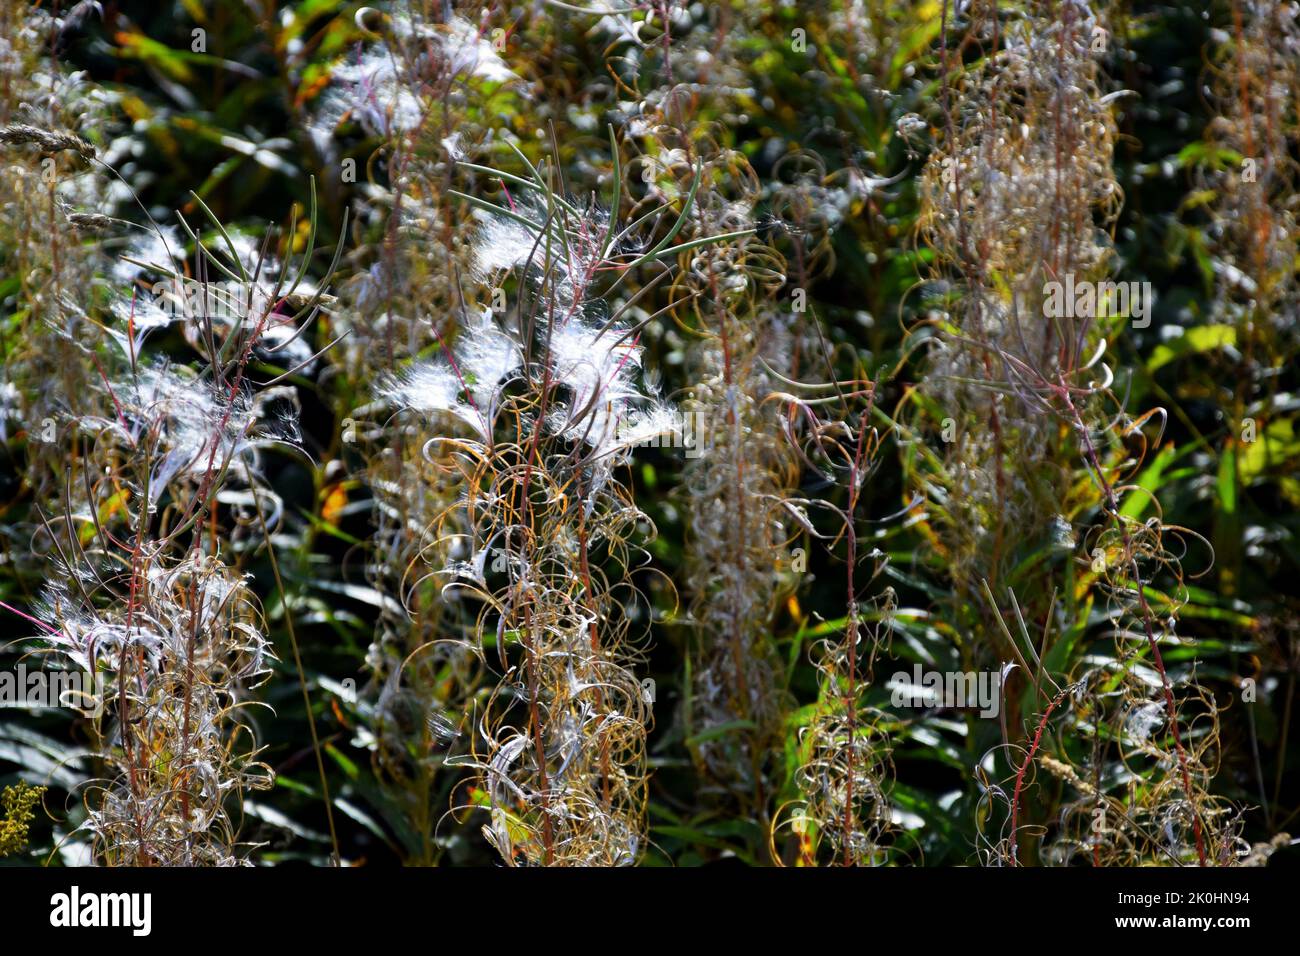 A closeup of Rotala plants growing in a field in sunlight Stock Photo